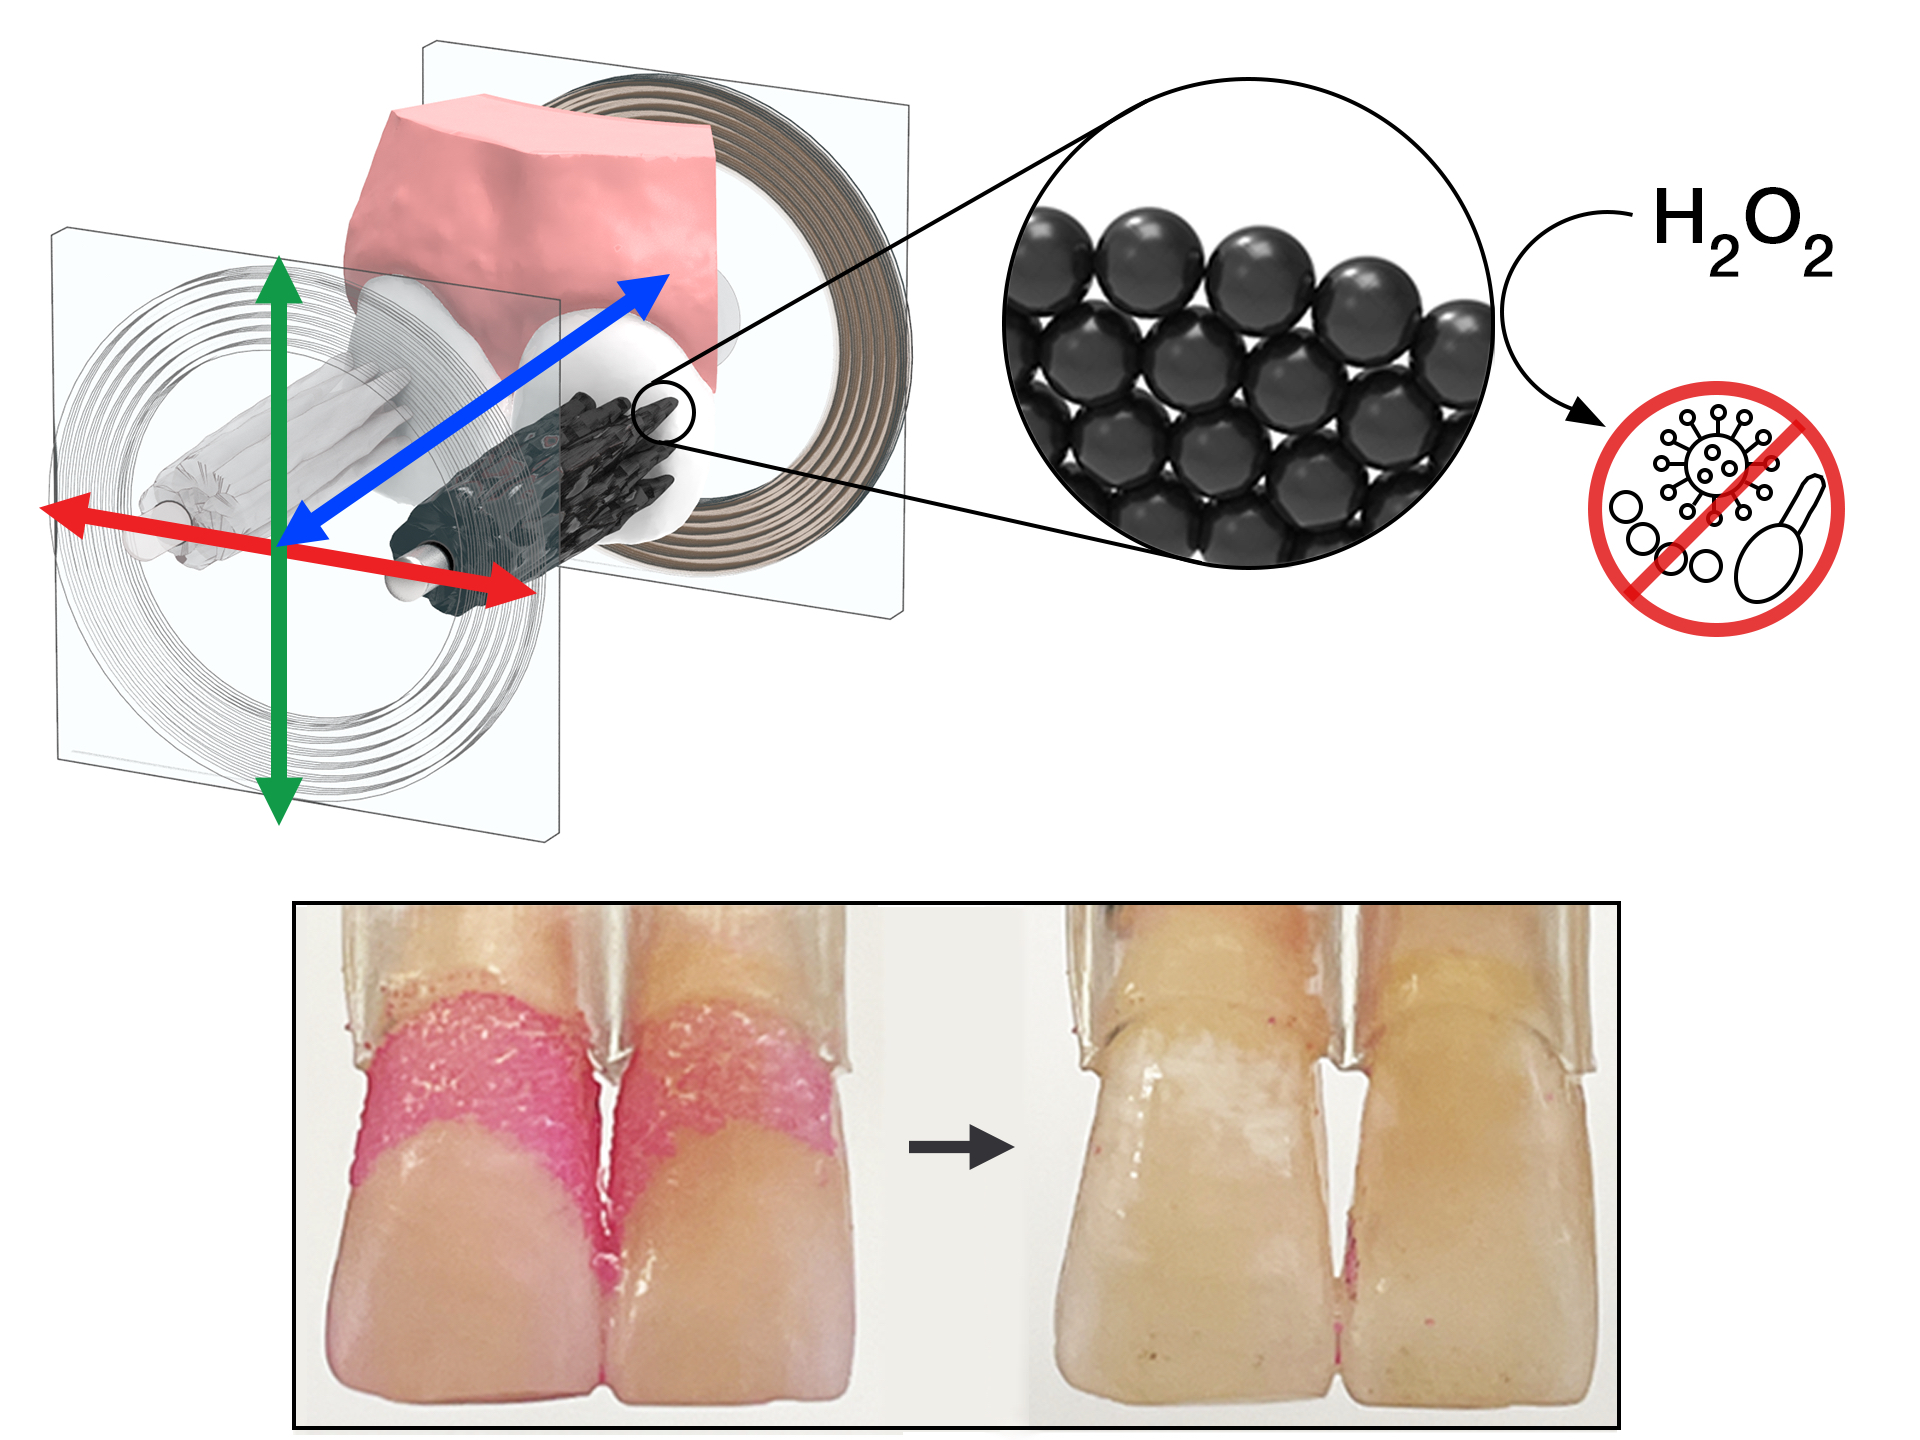 Arranged in bristle-like structures, a robotic microswarm of iron oxide nanoparticles effectively cleaned plaque from teeth.